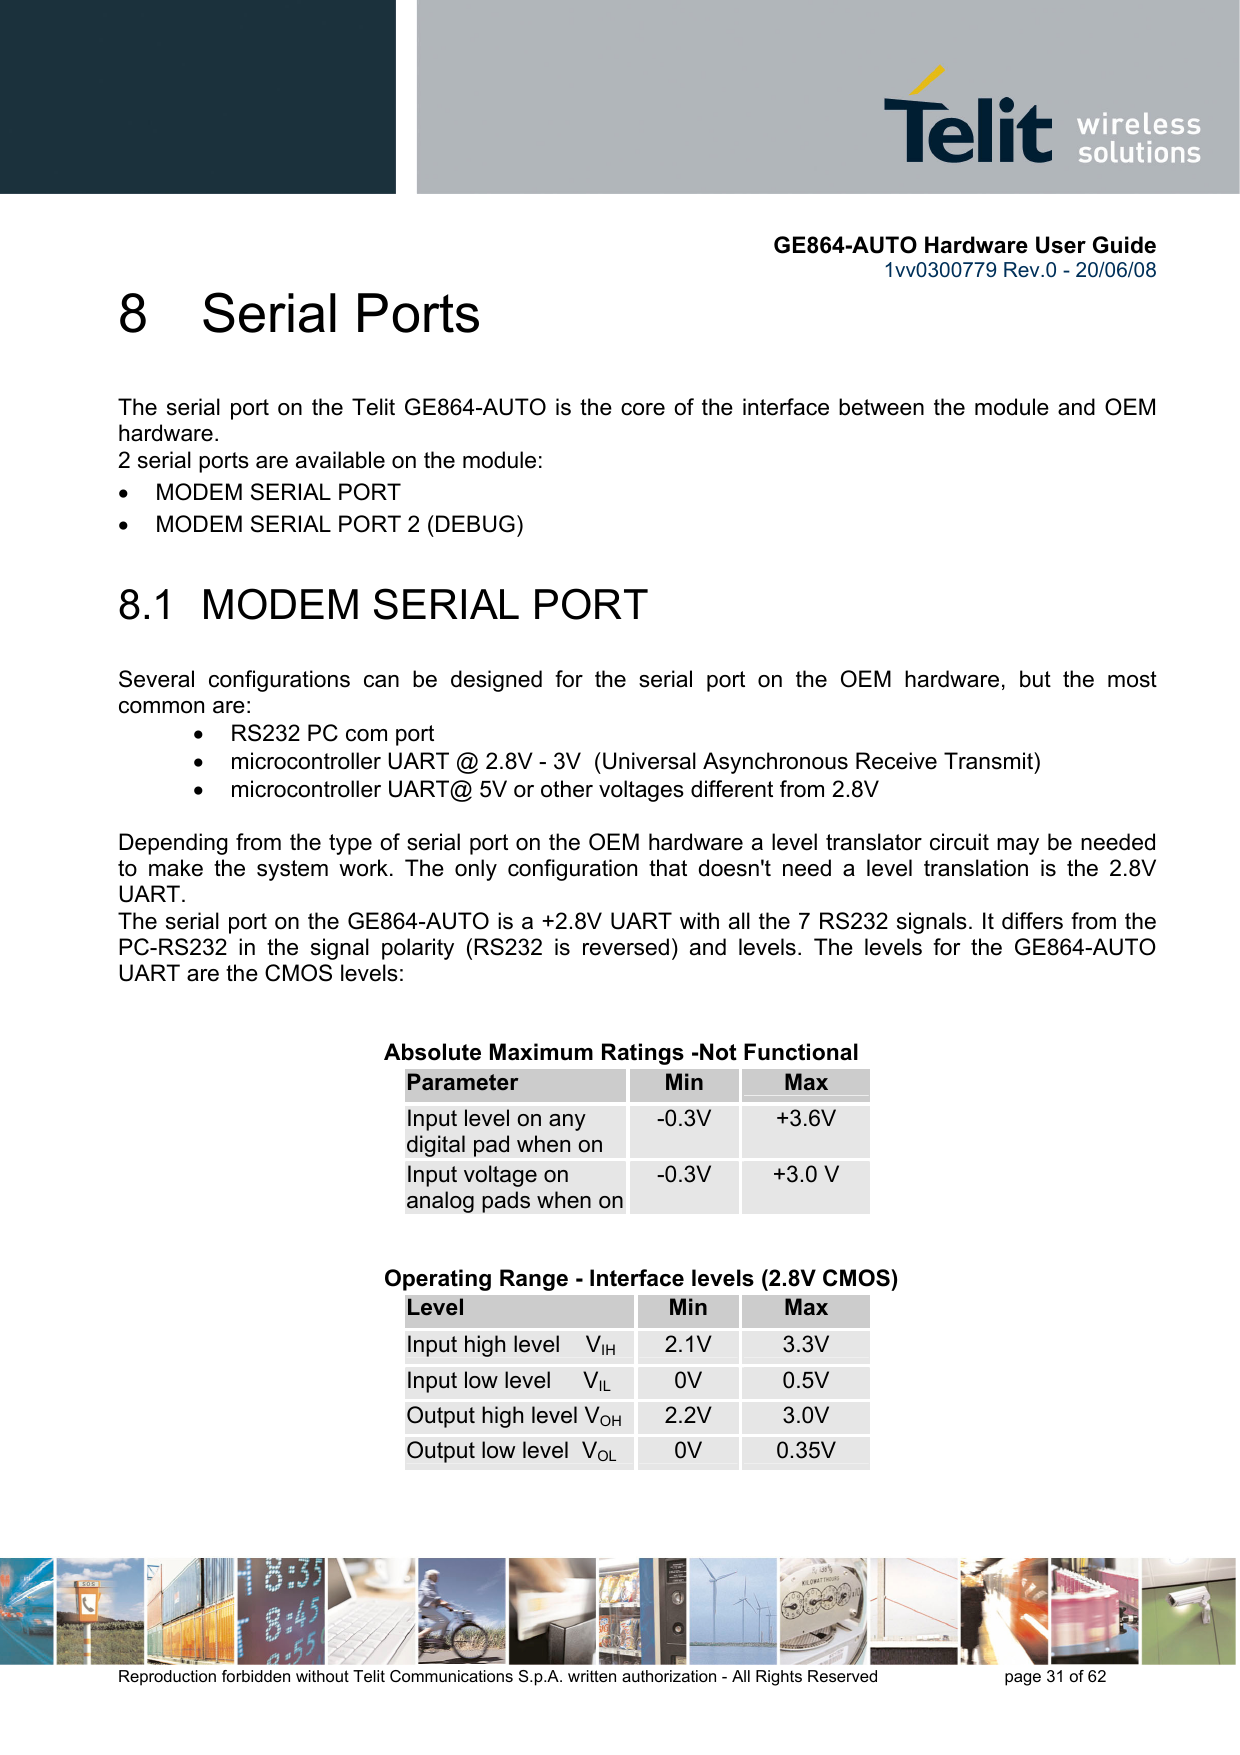       GE864-AUTO Hardware User Guide 1vv0300779 Rev.0 - 20/06/08      Reproduction forbidden without Telit Communications S.p.A. written authorization - All Rights Reserved    page 31 of 62  8 Serial Ports The serial port on the Telit GE864-AUTO is the core of the interface between the module and OEM hardware.  2 serial ports are available on the module: •  MODEM SERIAL PORT •  MODEM SERIAL PORT 2 (DEBUG)  8.1 MODEM SERIAL PORT Several configurations can be designed for the serial port on the OEM hardware, but the most common are: •  RS232 PC com port •  microcontroller UART @ 2.8V - 3V  (Universal Asynchronous Receive Transmit)  •  microcontroller UART@ 5V or other voltages different from 2.8V   Depending from the type of serial port on the OEM hardware a level translator circuit may be needed to make the system work. The only configuration that doesn&apos;t need a level translation is the 2.8V UART. The serial port on the GE864-AUTO is a +2.8V UART with all the 7 RS232 signals. It differs from the PC-RS232 in the signal polarity (RS232 is reversed) and levels. The levels for the GE864-AUTO UART are the CMOS levels:   Absolute Maximum Ratings -Not Functional Parameter  Min  Max Input level on any digital pad when on -0.3V  +3.6V Input voltage on analog pads when on-0.3V  +3.0 V      Operating Range - Interface levels (2.8V CMOS) Level  Min  Max Input high level    VIH  2.1V  3.3V Input low level     VIL 0V  0.5V Output high level VOH 2.2V  3.0V Output low level  VOL 0V  0.35V   